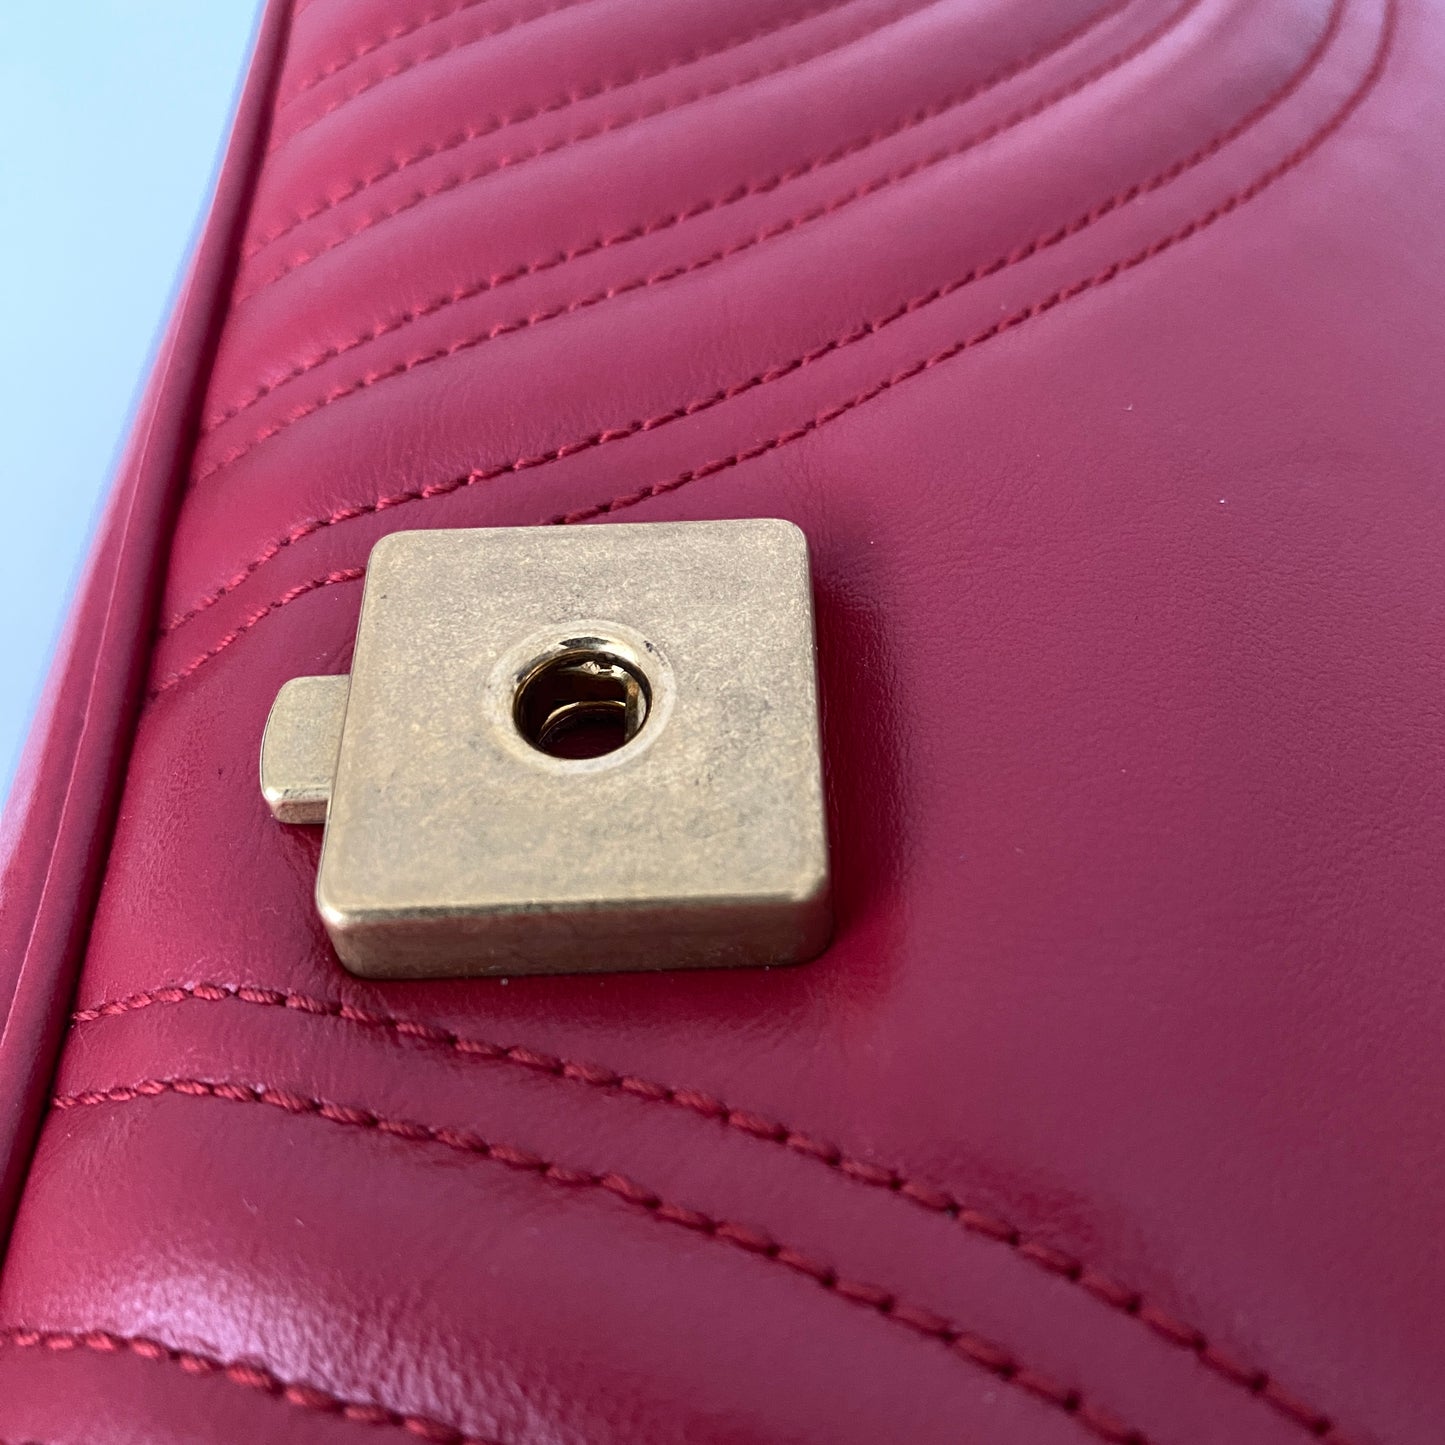 GUCCI MARMONT SMALL RED LEATHER FLAP BAG